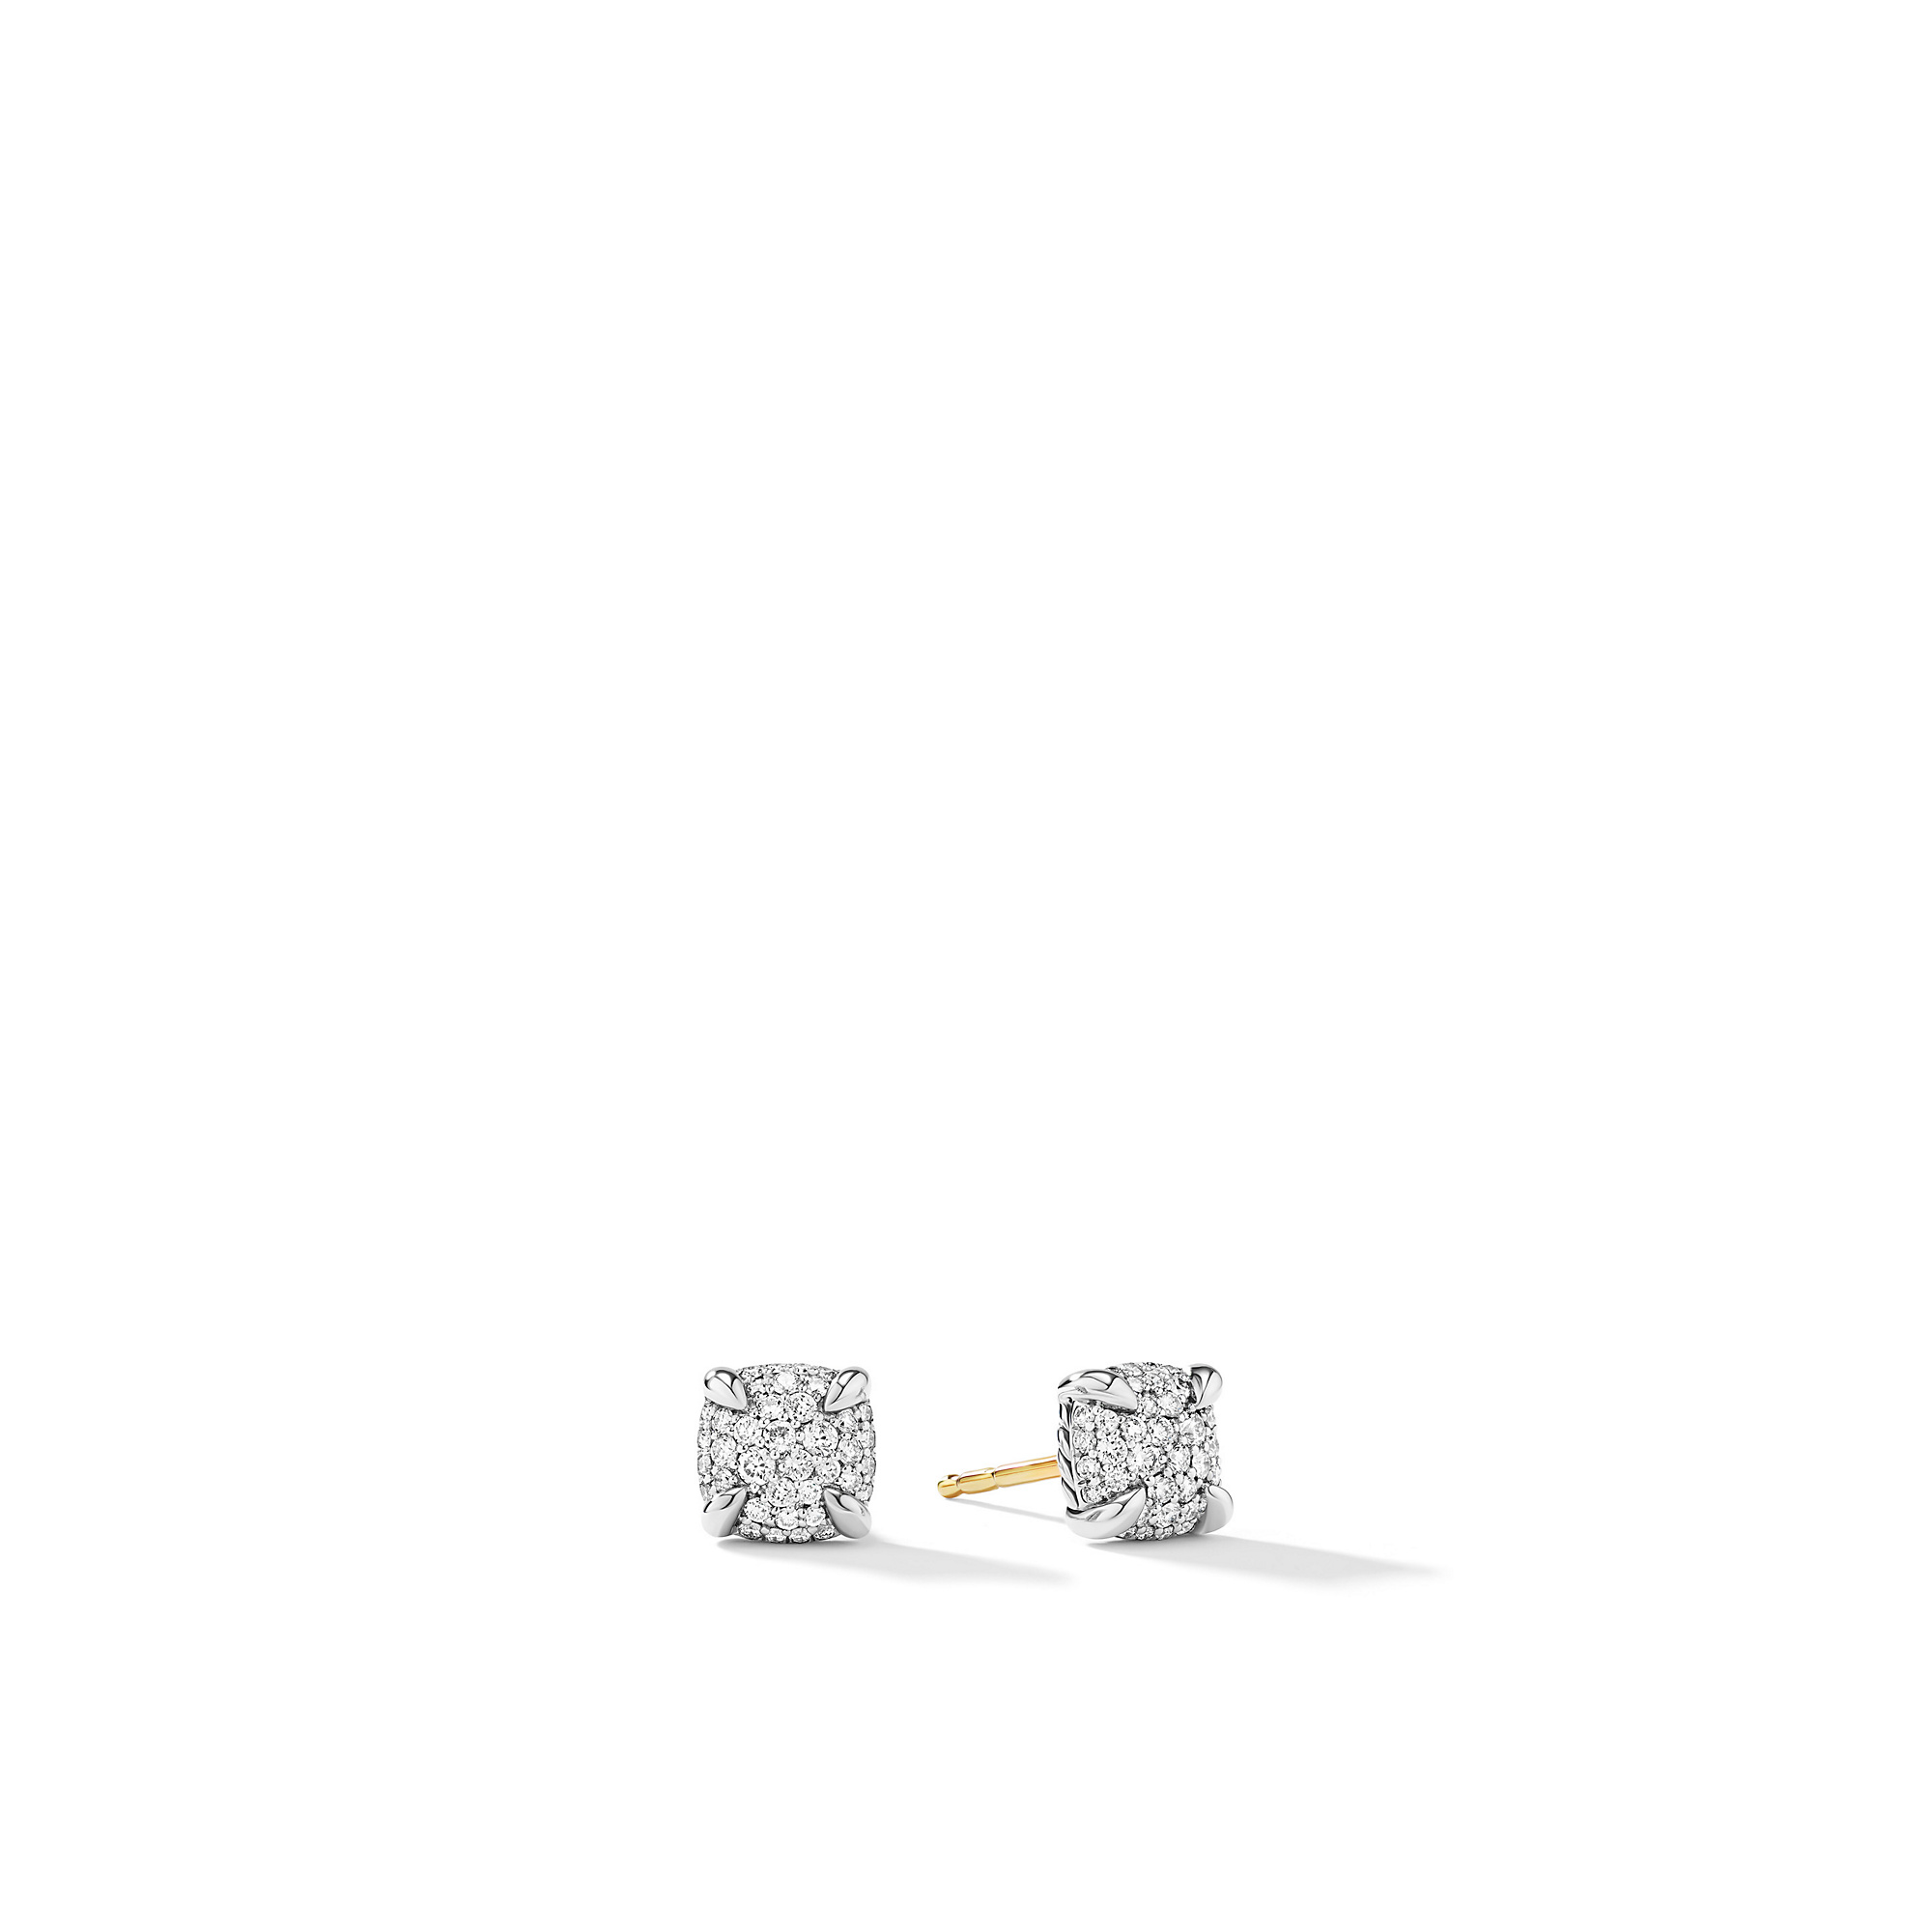 Petite Chatelaine® Stud Earrings in Sterling Silver with Full Pave Diamonds